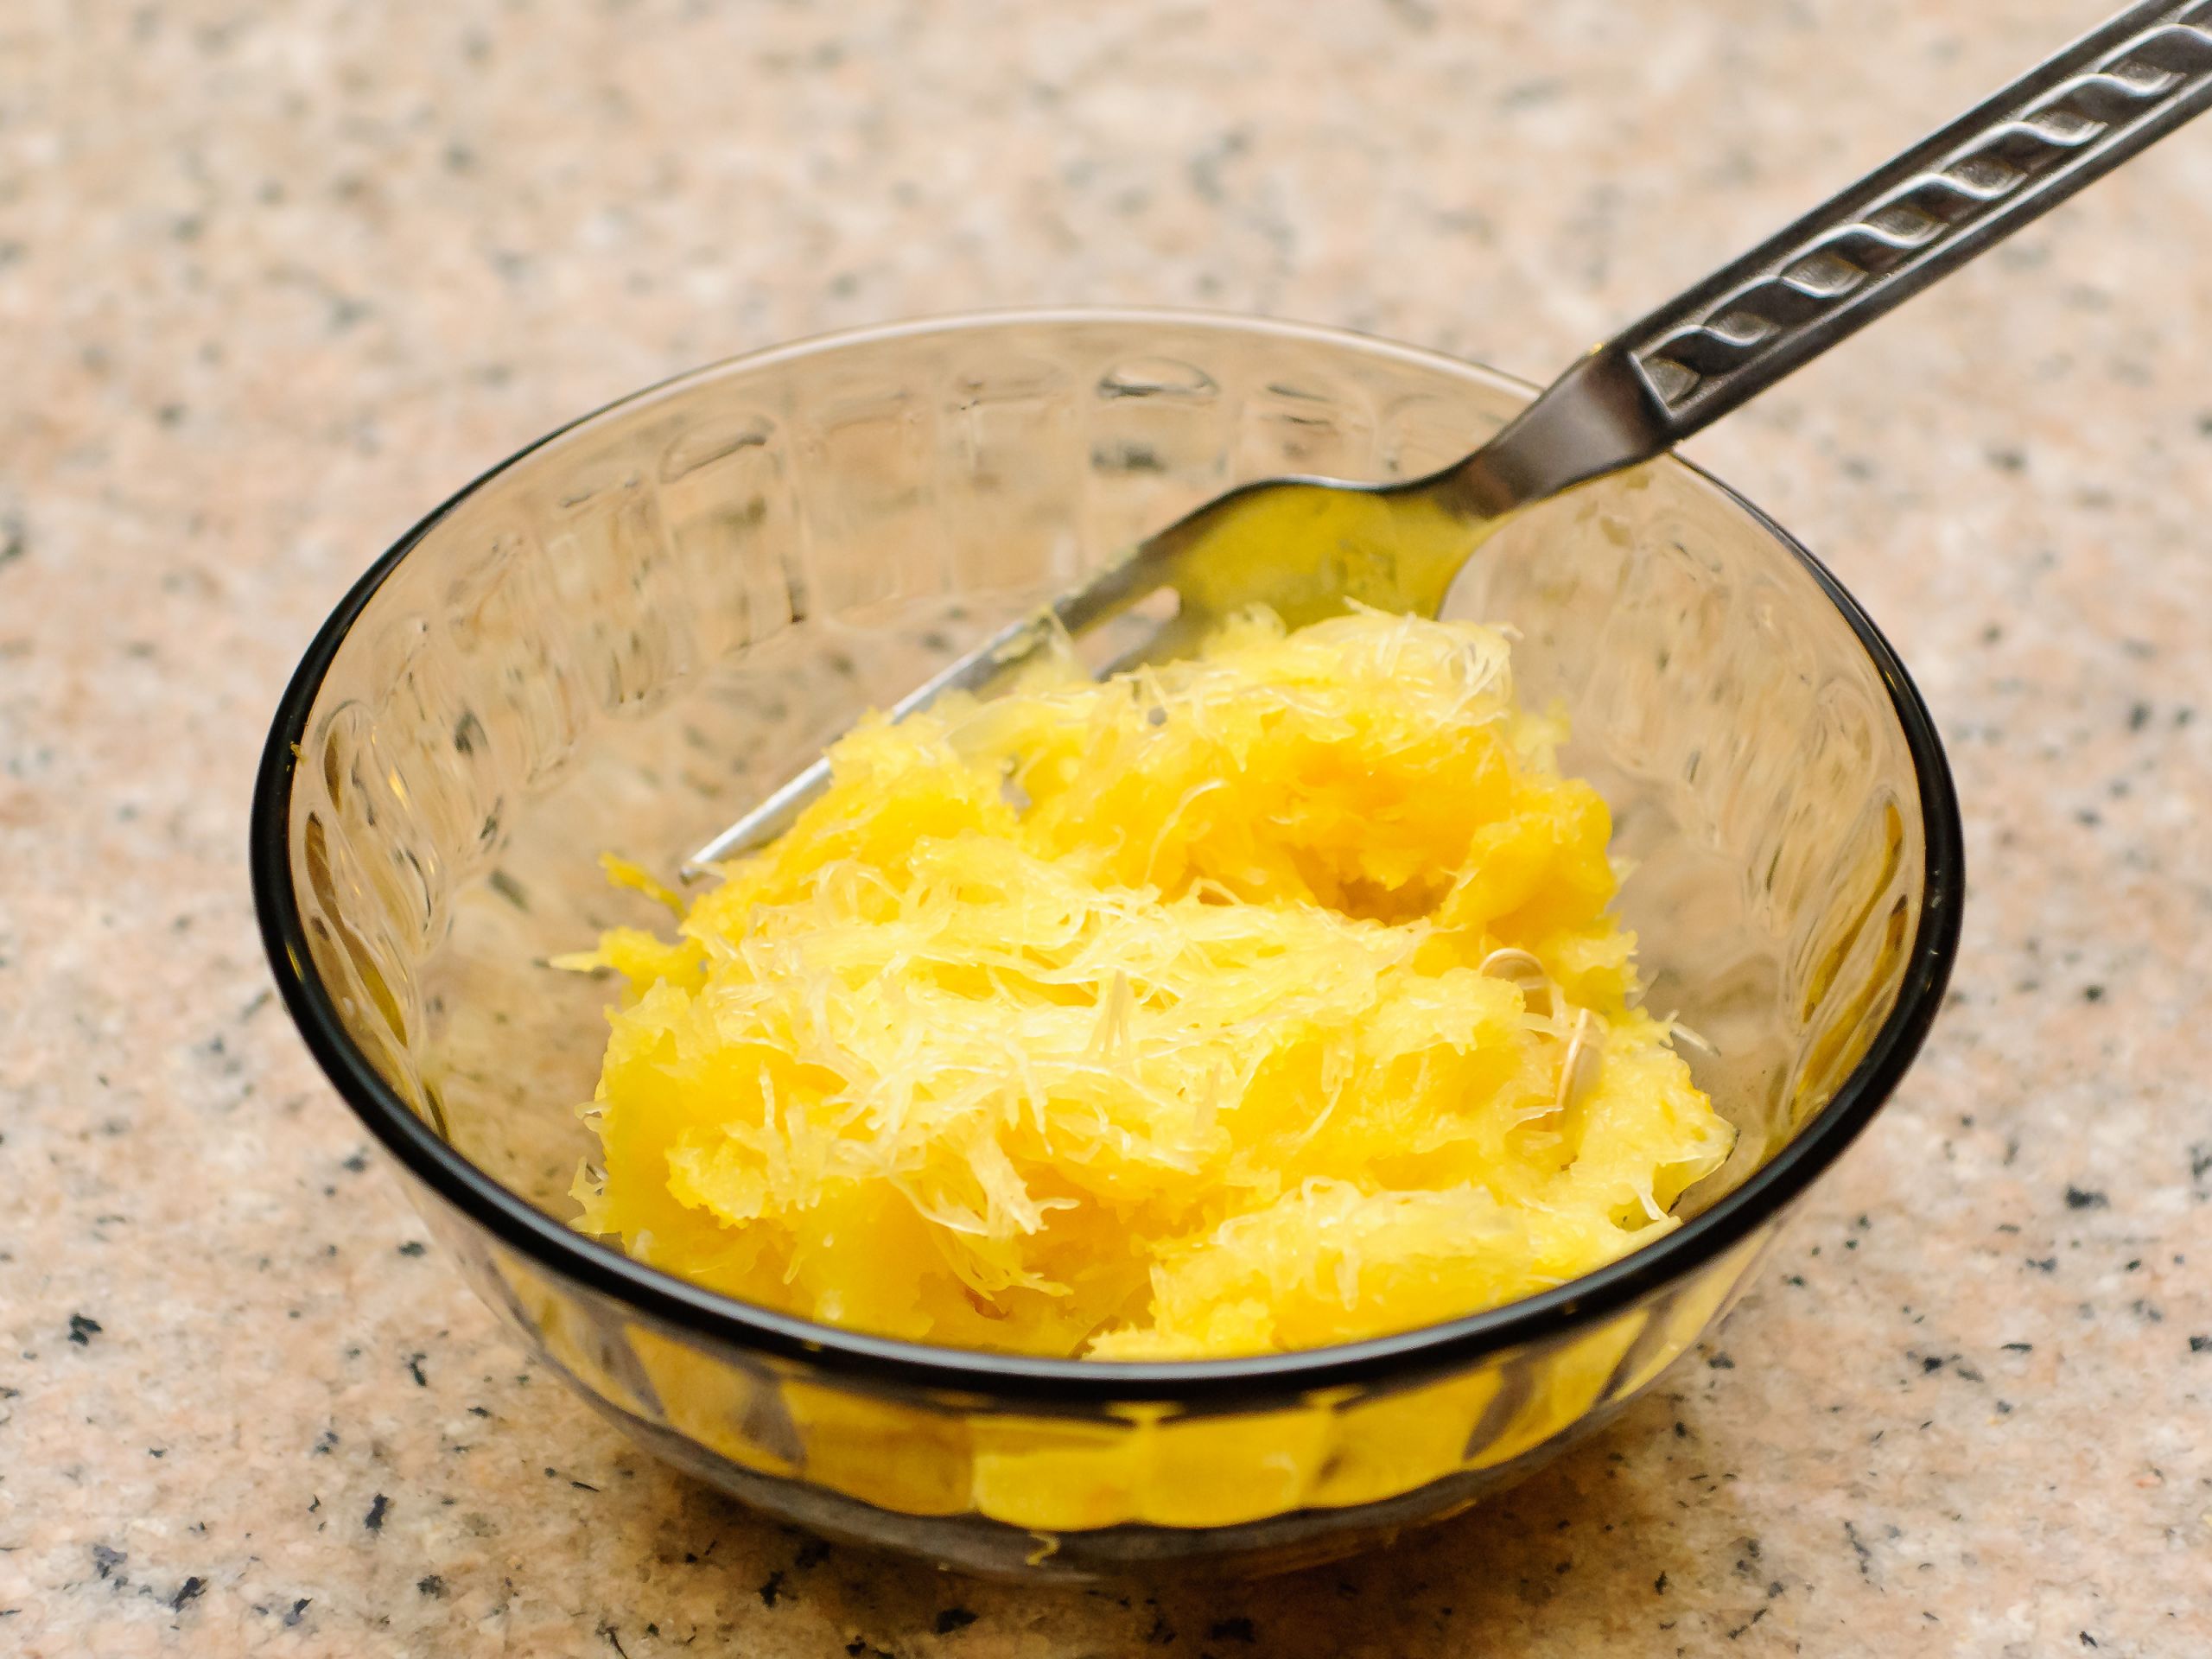 Microwave Spaghetti Squash Whole
 How to Cook Spaghetti Squash in Microwave with